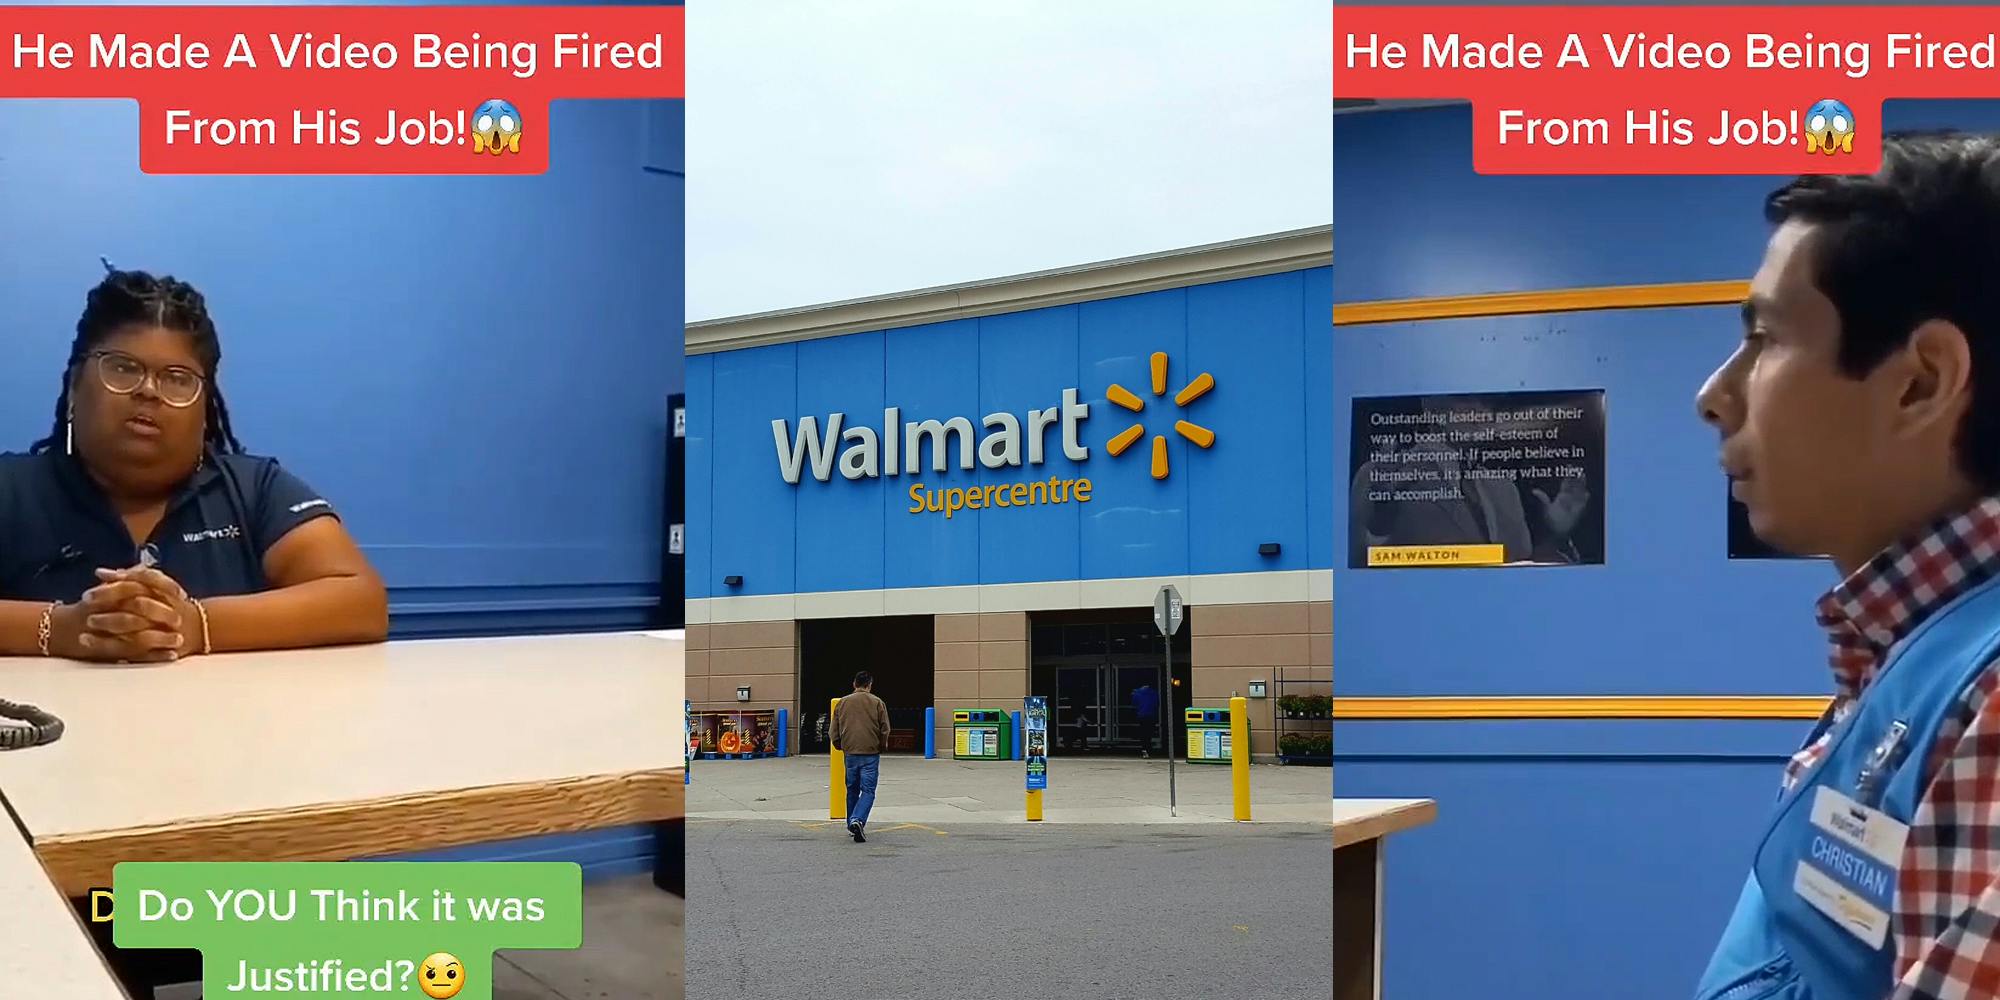 Walmart manager speaking sitting at desk caption "He Made A Video Being Fired From His Job!" "Do YOU Think it was Justified?" (l) Walmart store with sign (c) Walmart employee sitting down in front of desk caption "He Made A Video Being Fired From His Job!" (r)